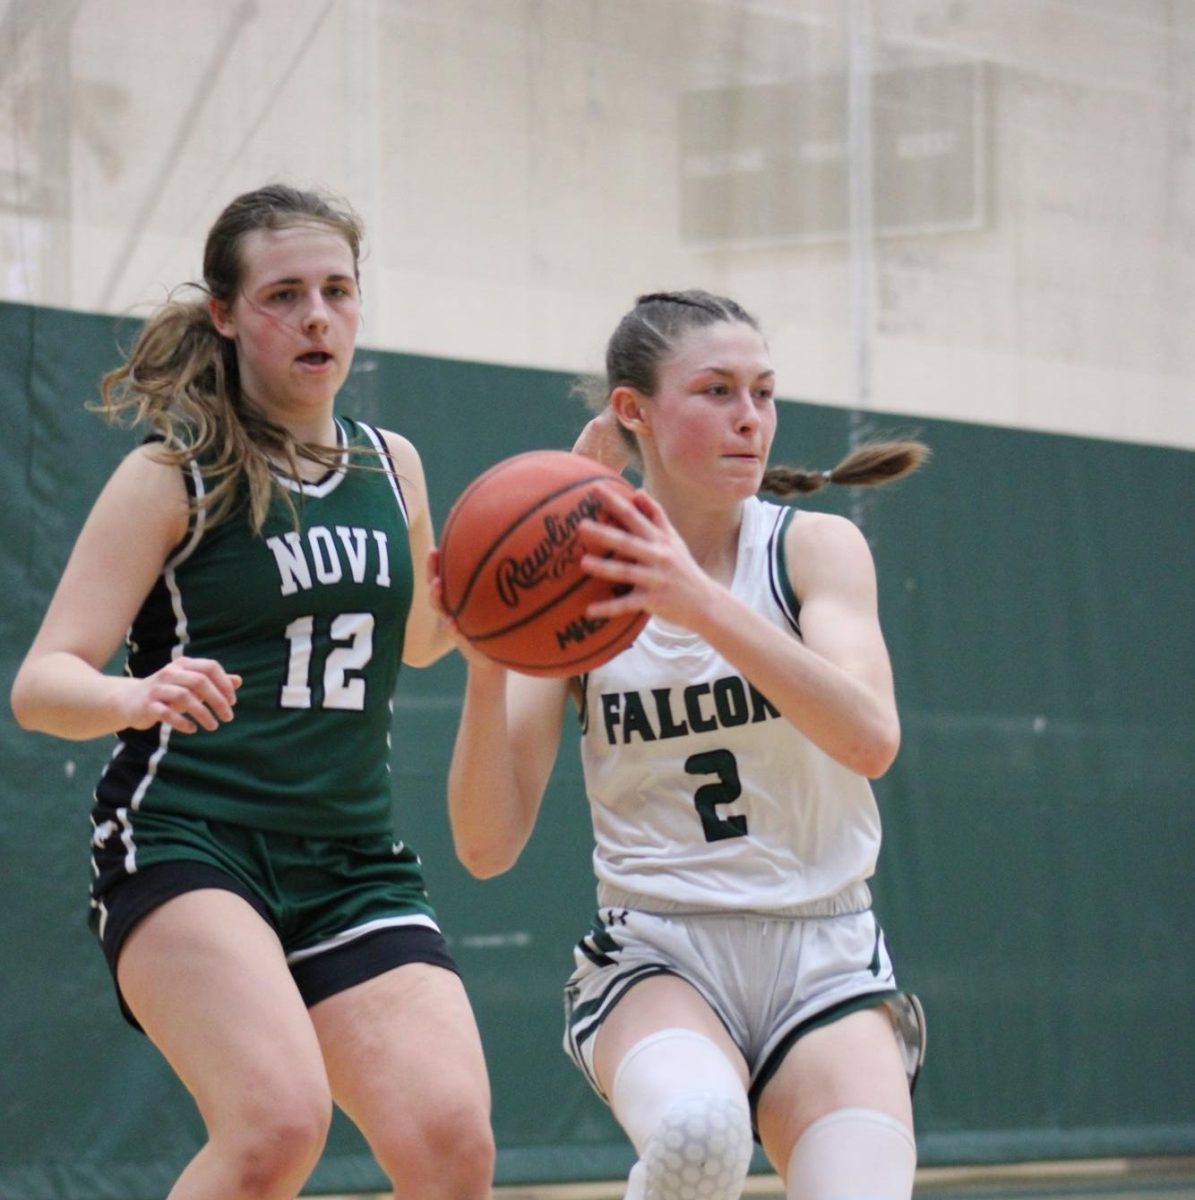 Groves point guard Jacey Roy drives past a Novi defender, setting up for a pass out to the wing. Roy has been on the varsity team since a freshman, and plays a key role in Groves rotation.